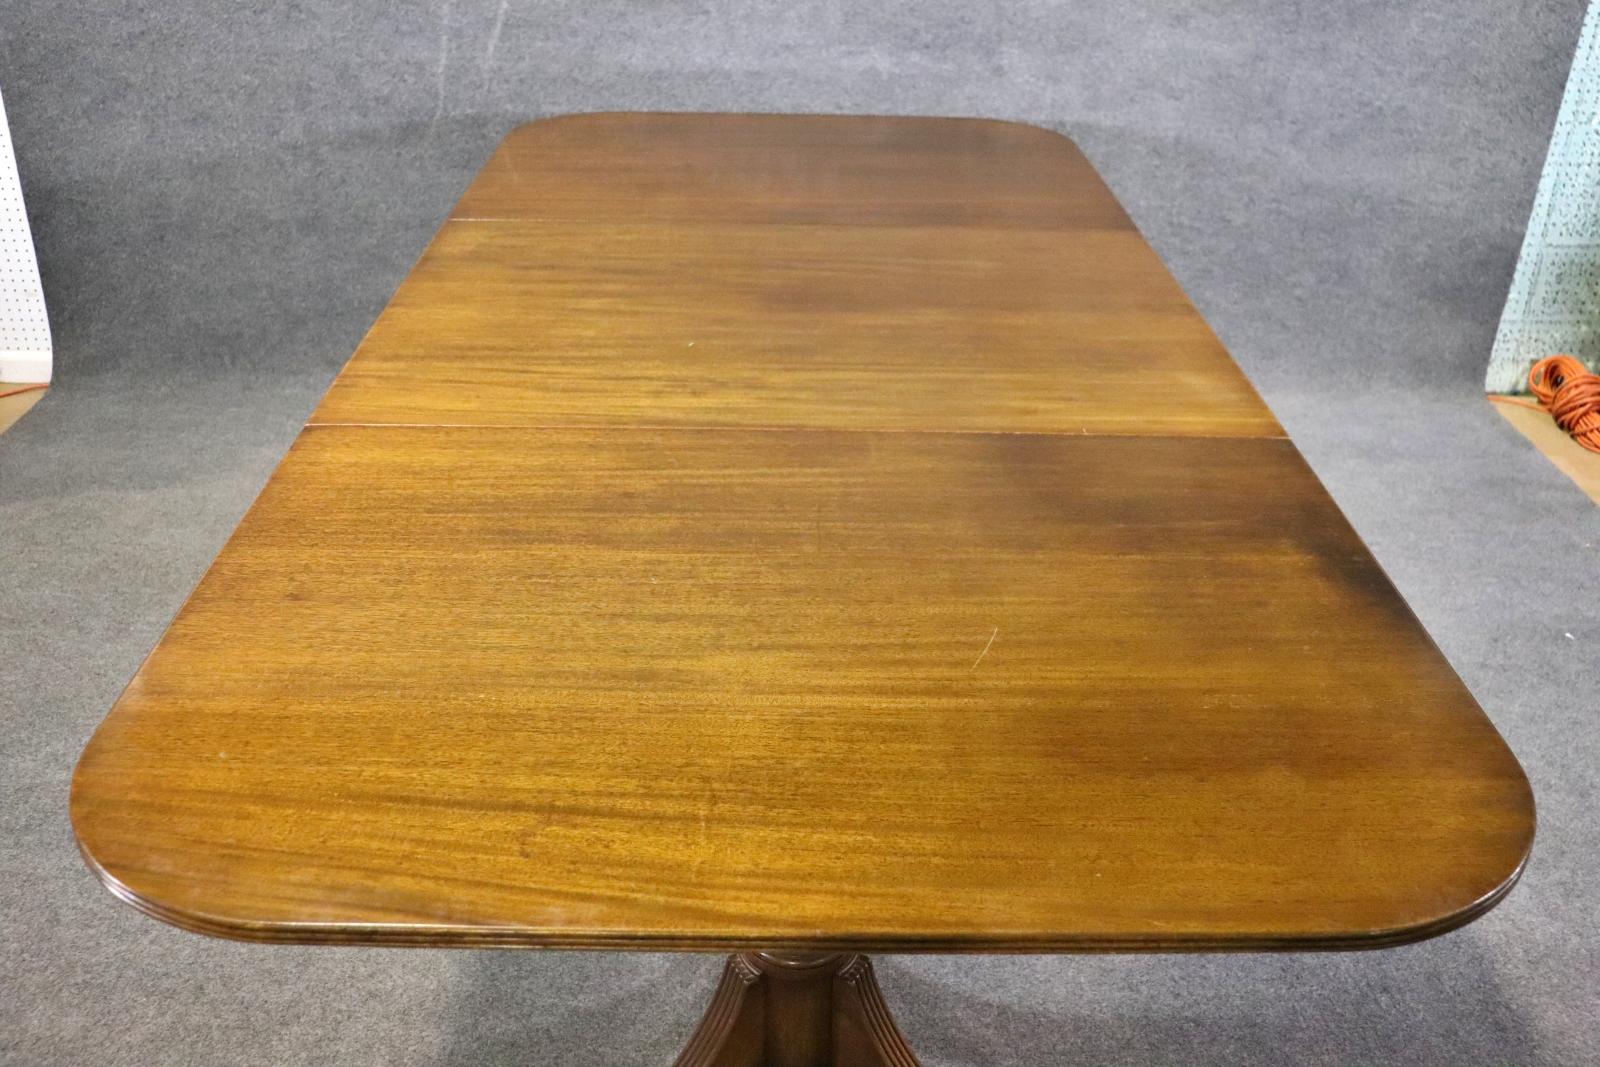 Plum Pudding Mahogany Banquet Dining Table with 2 leaves Manner Gillows For Sale 8